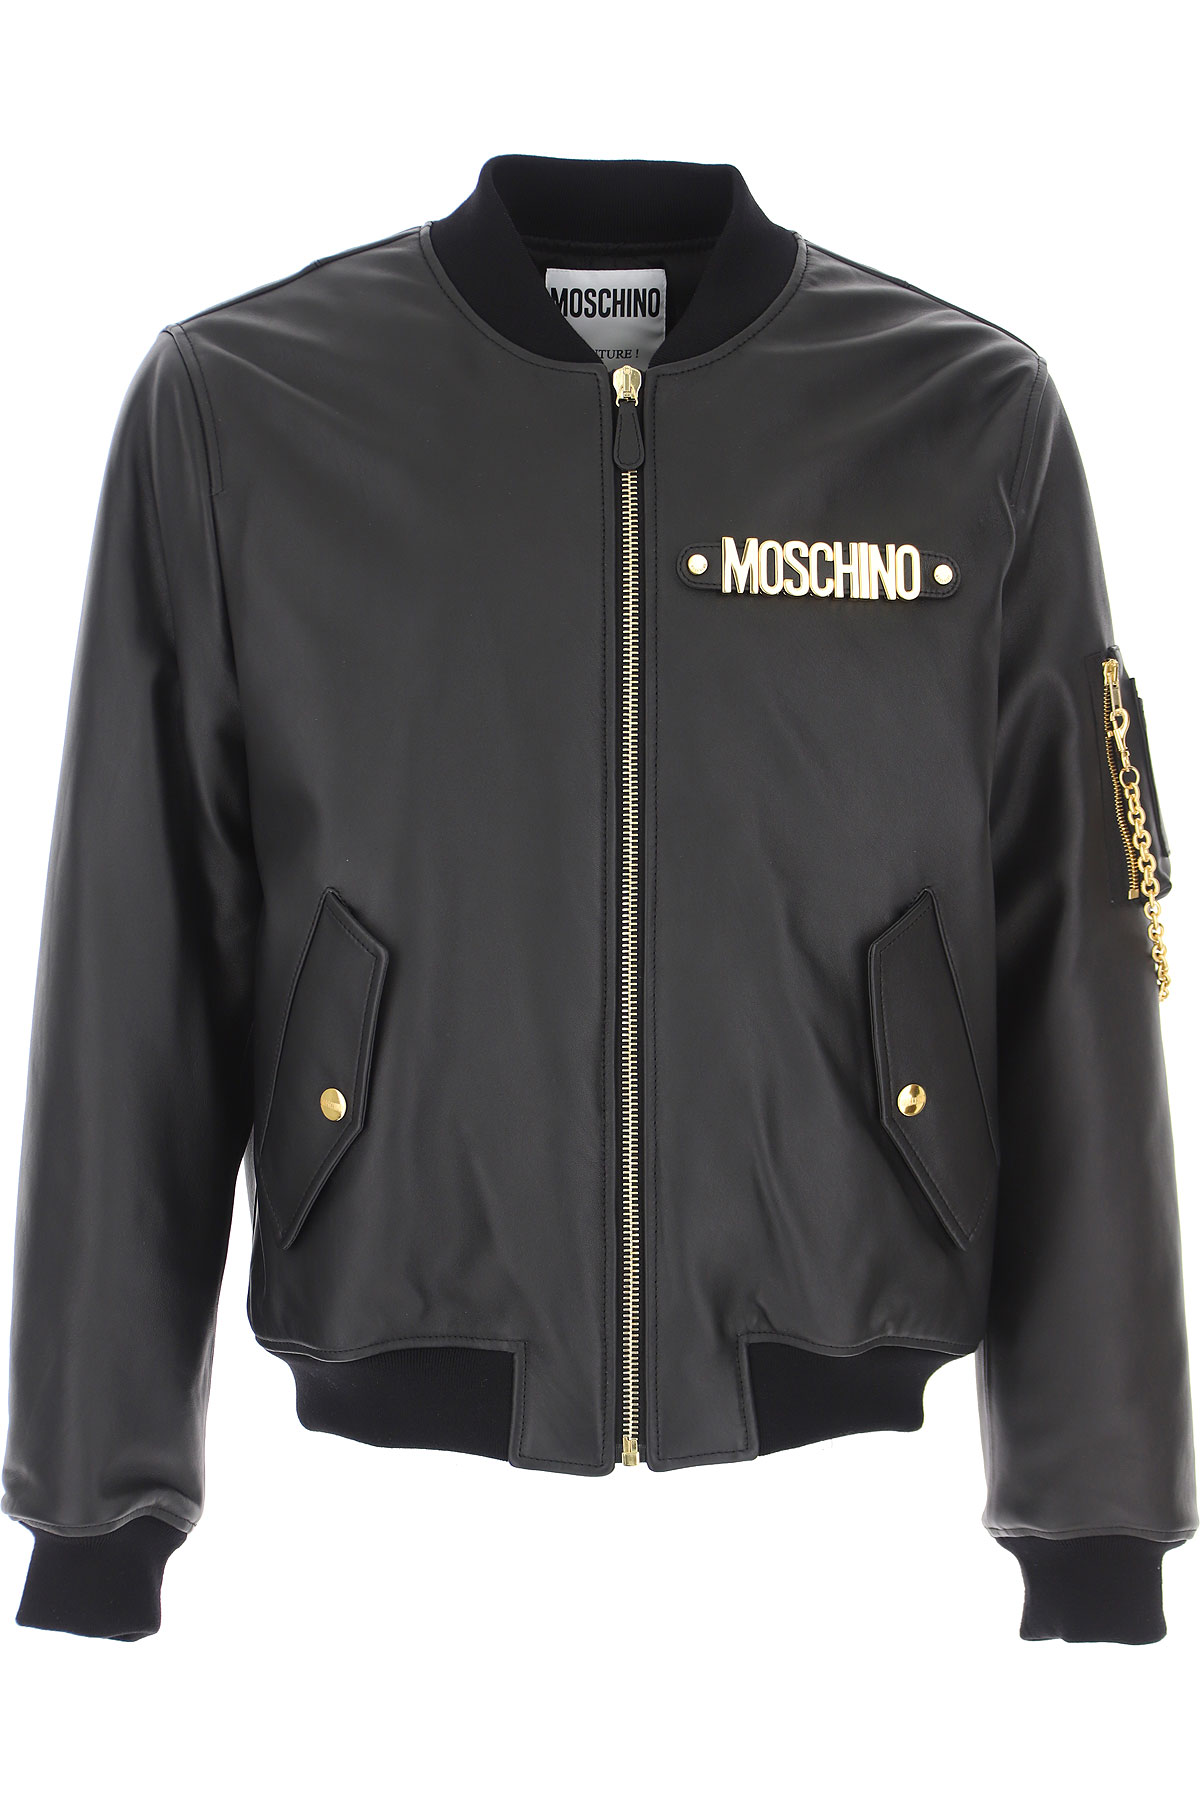 Mens Clothing Moschino, Style code: j3702-2070-0555